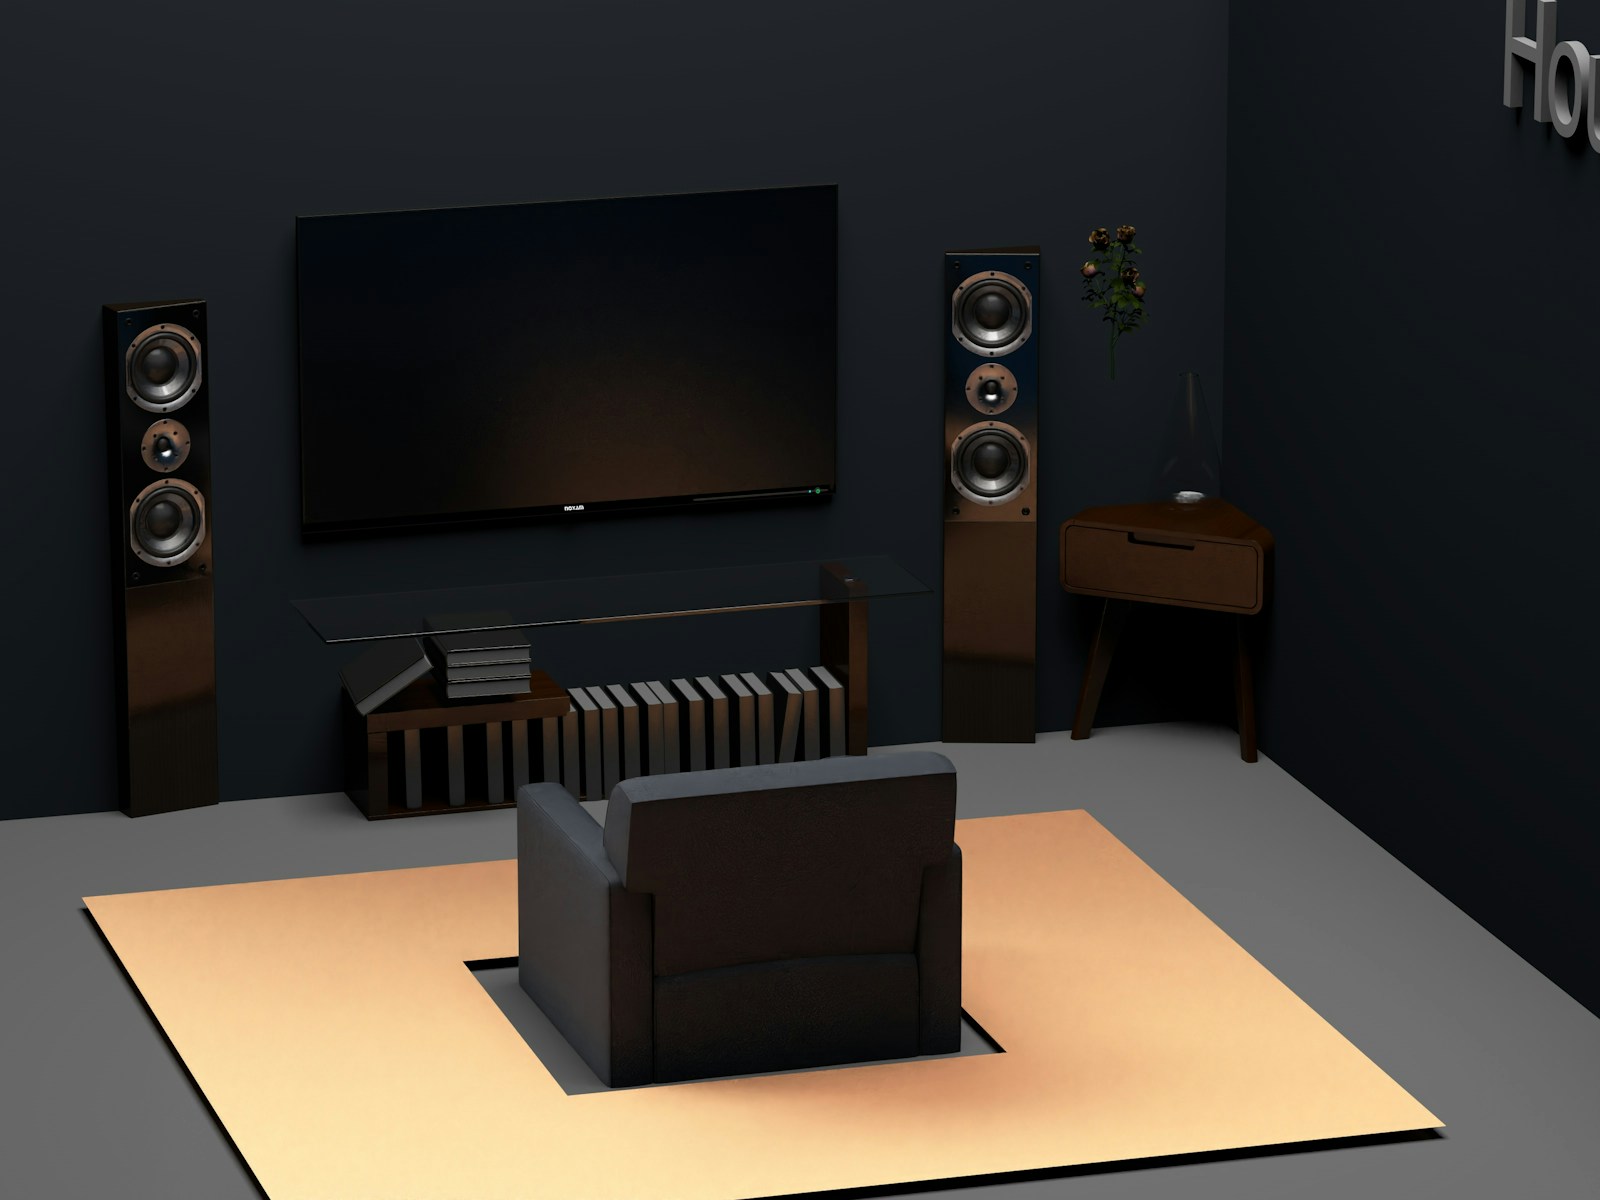 Choosing a Home Theatre System